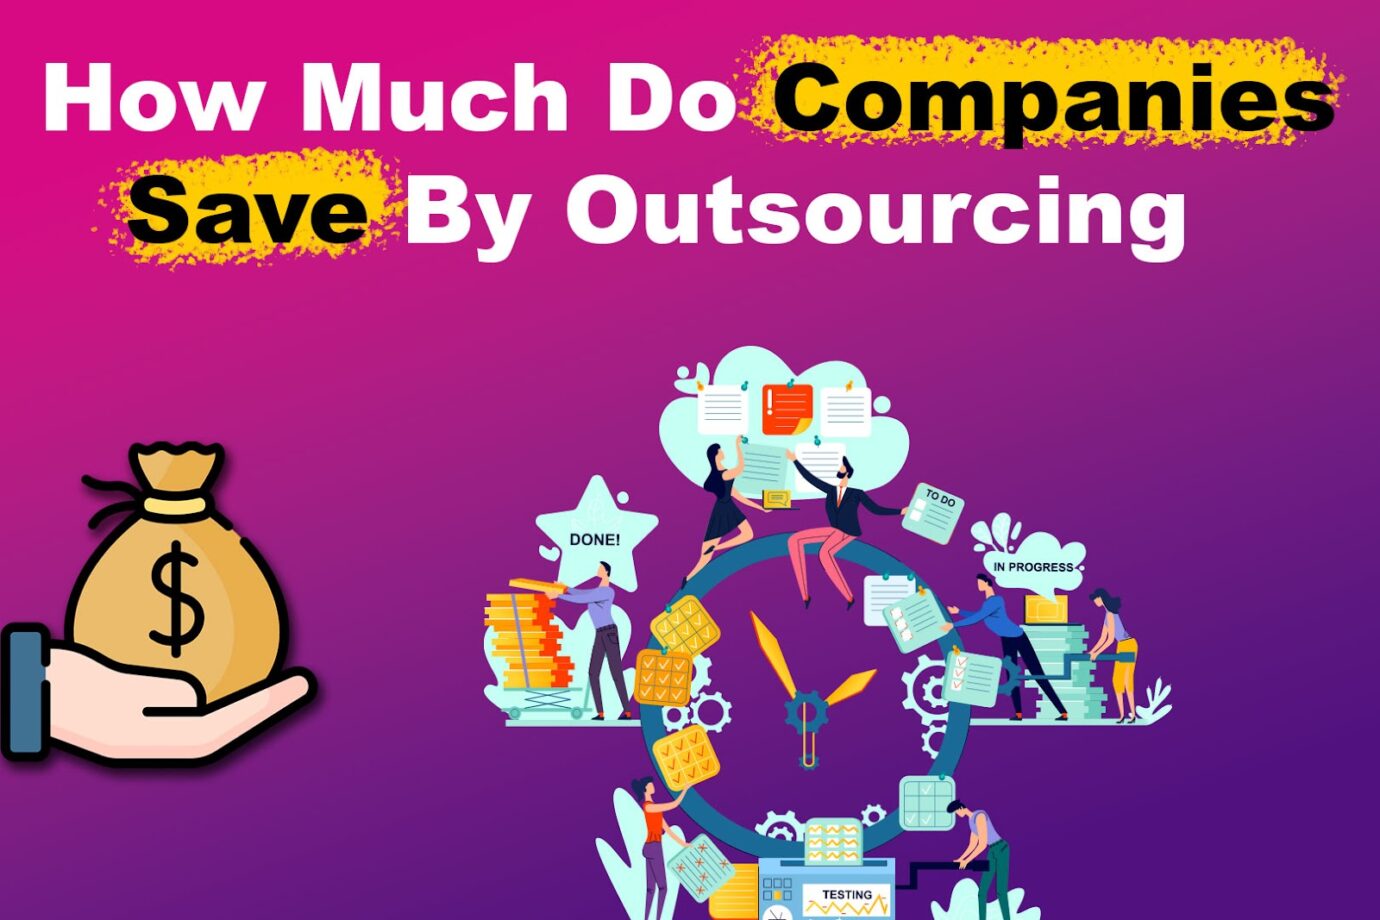 How Much Do Companies Save By Outsourcing